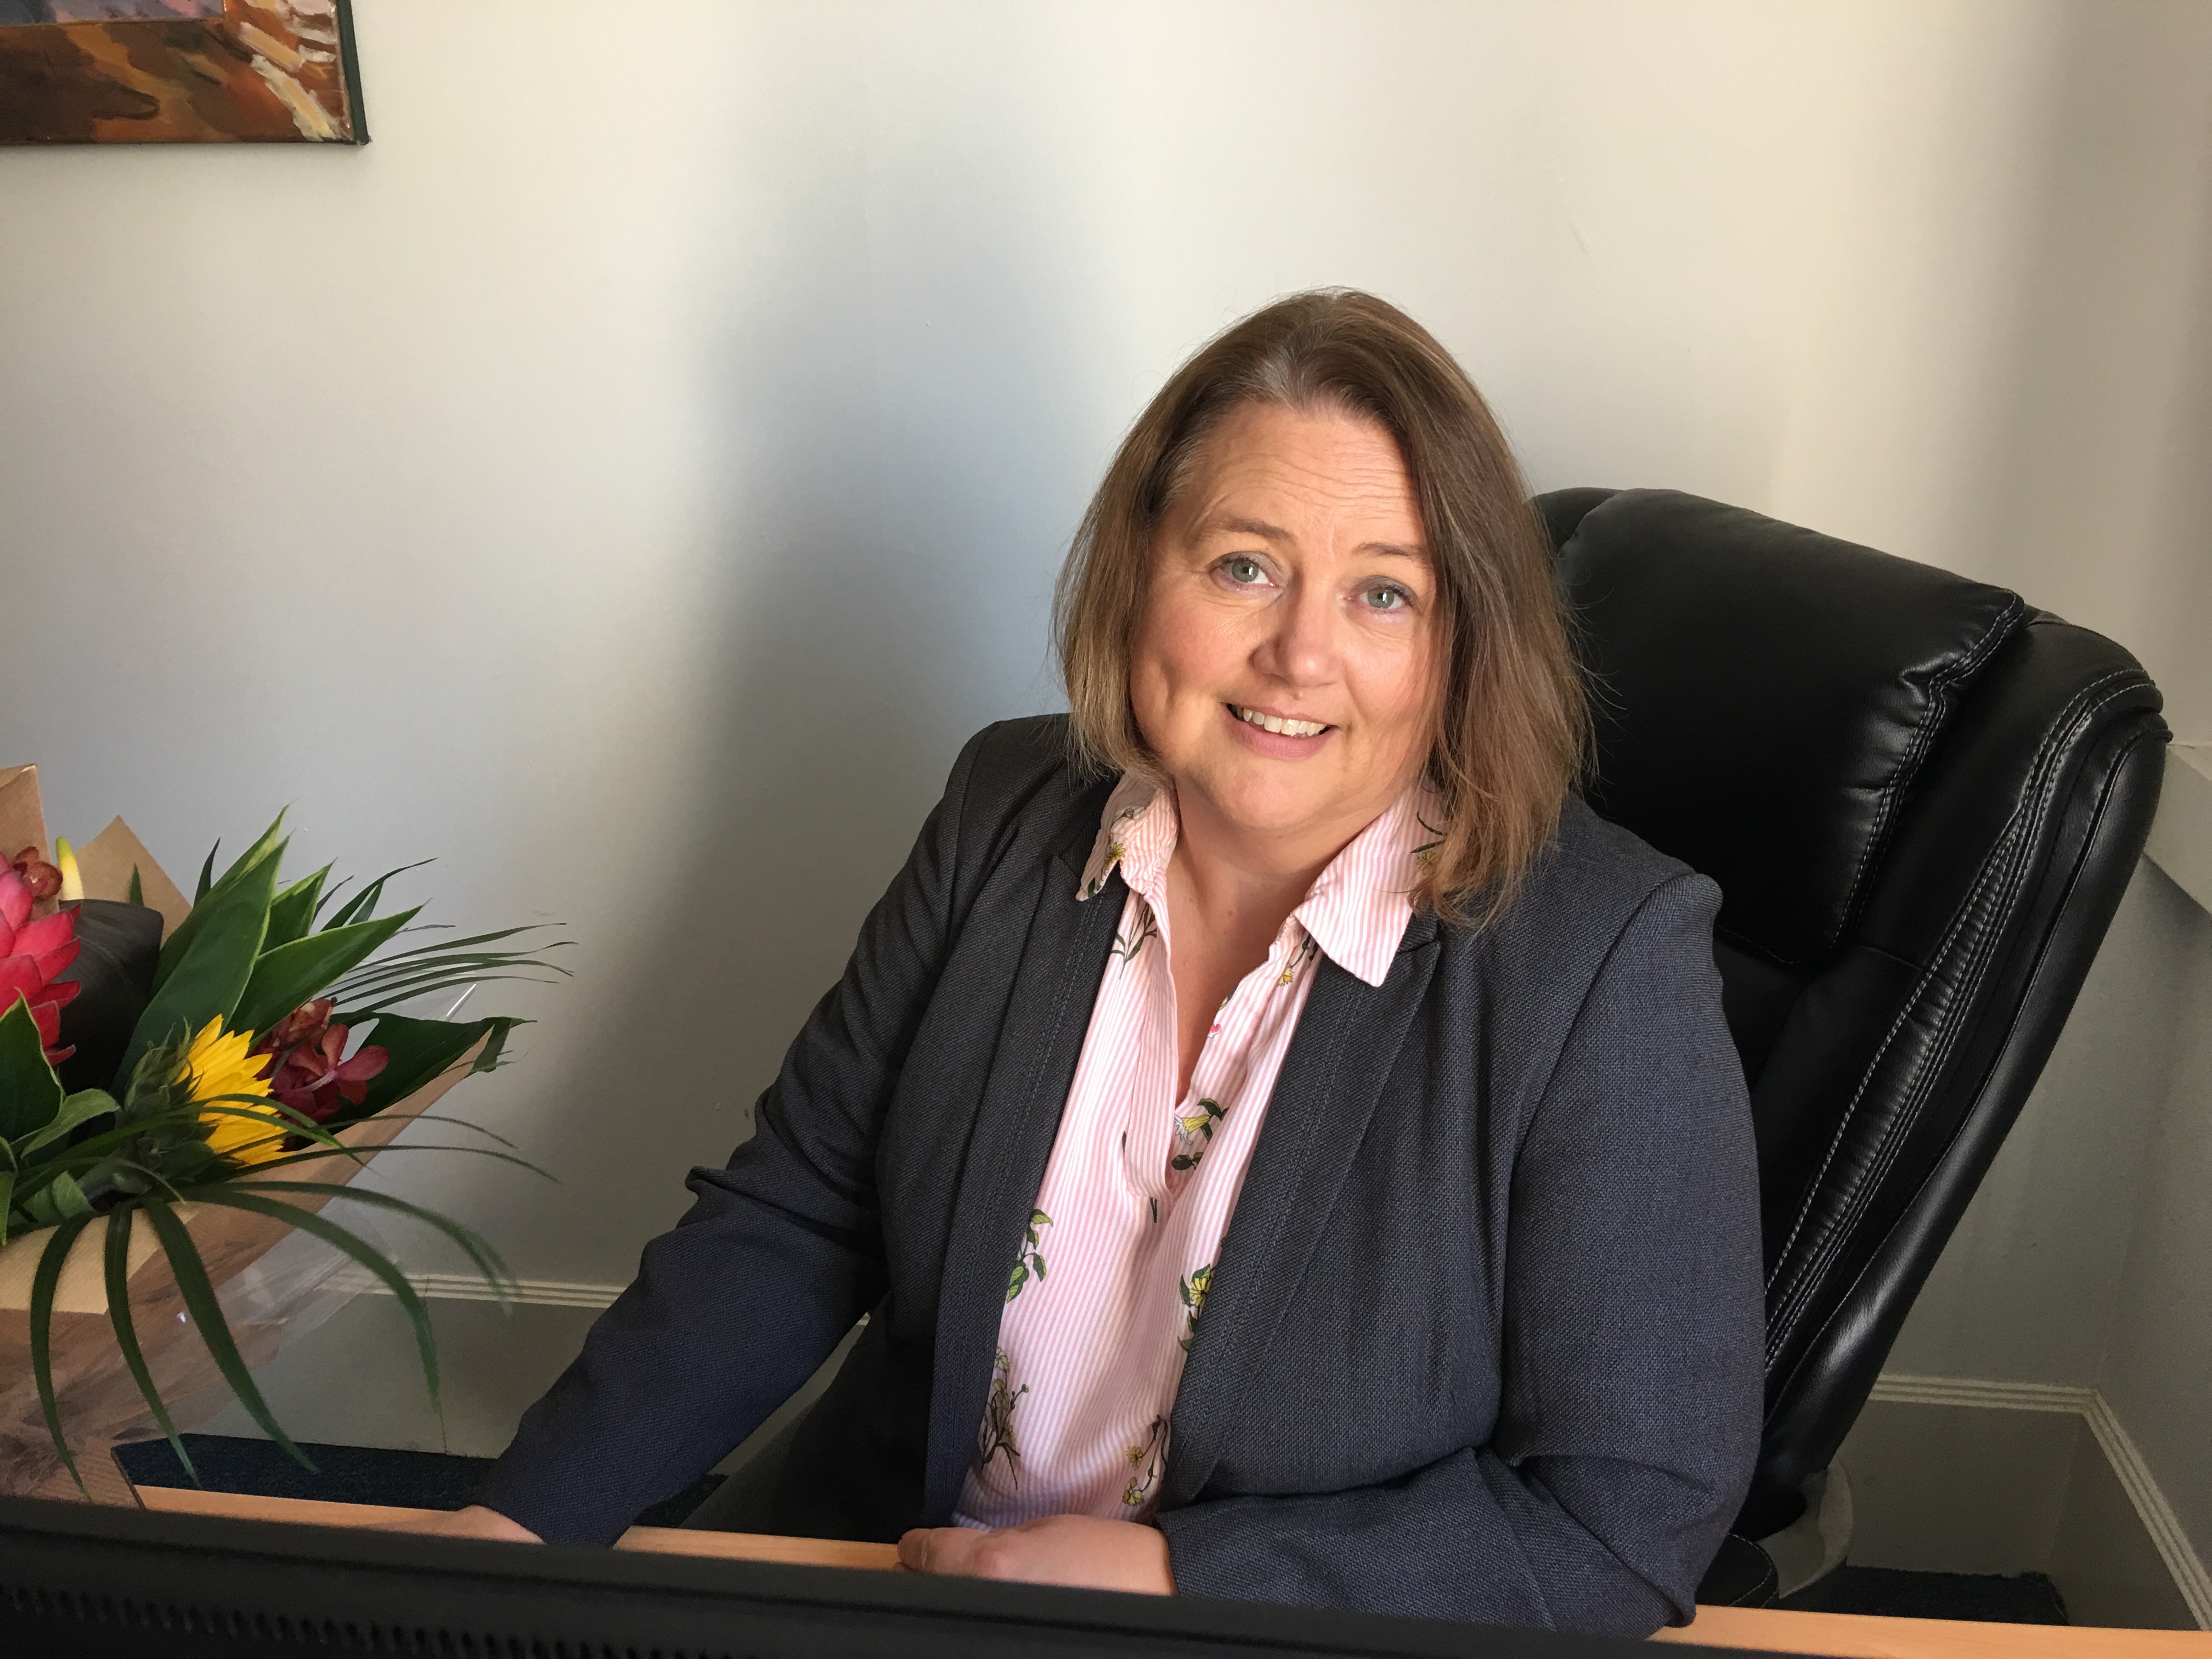 Julie Lawson - experienced Governance Clerk and Director